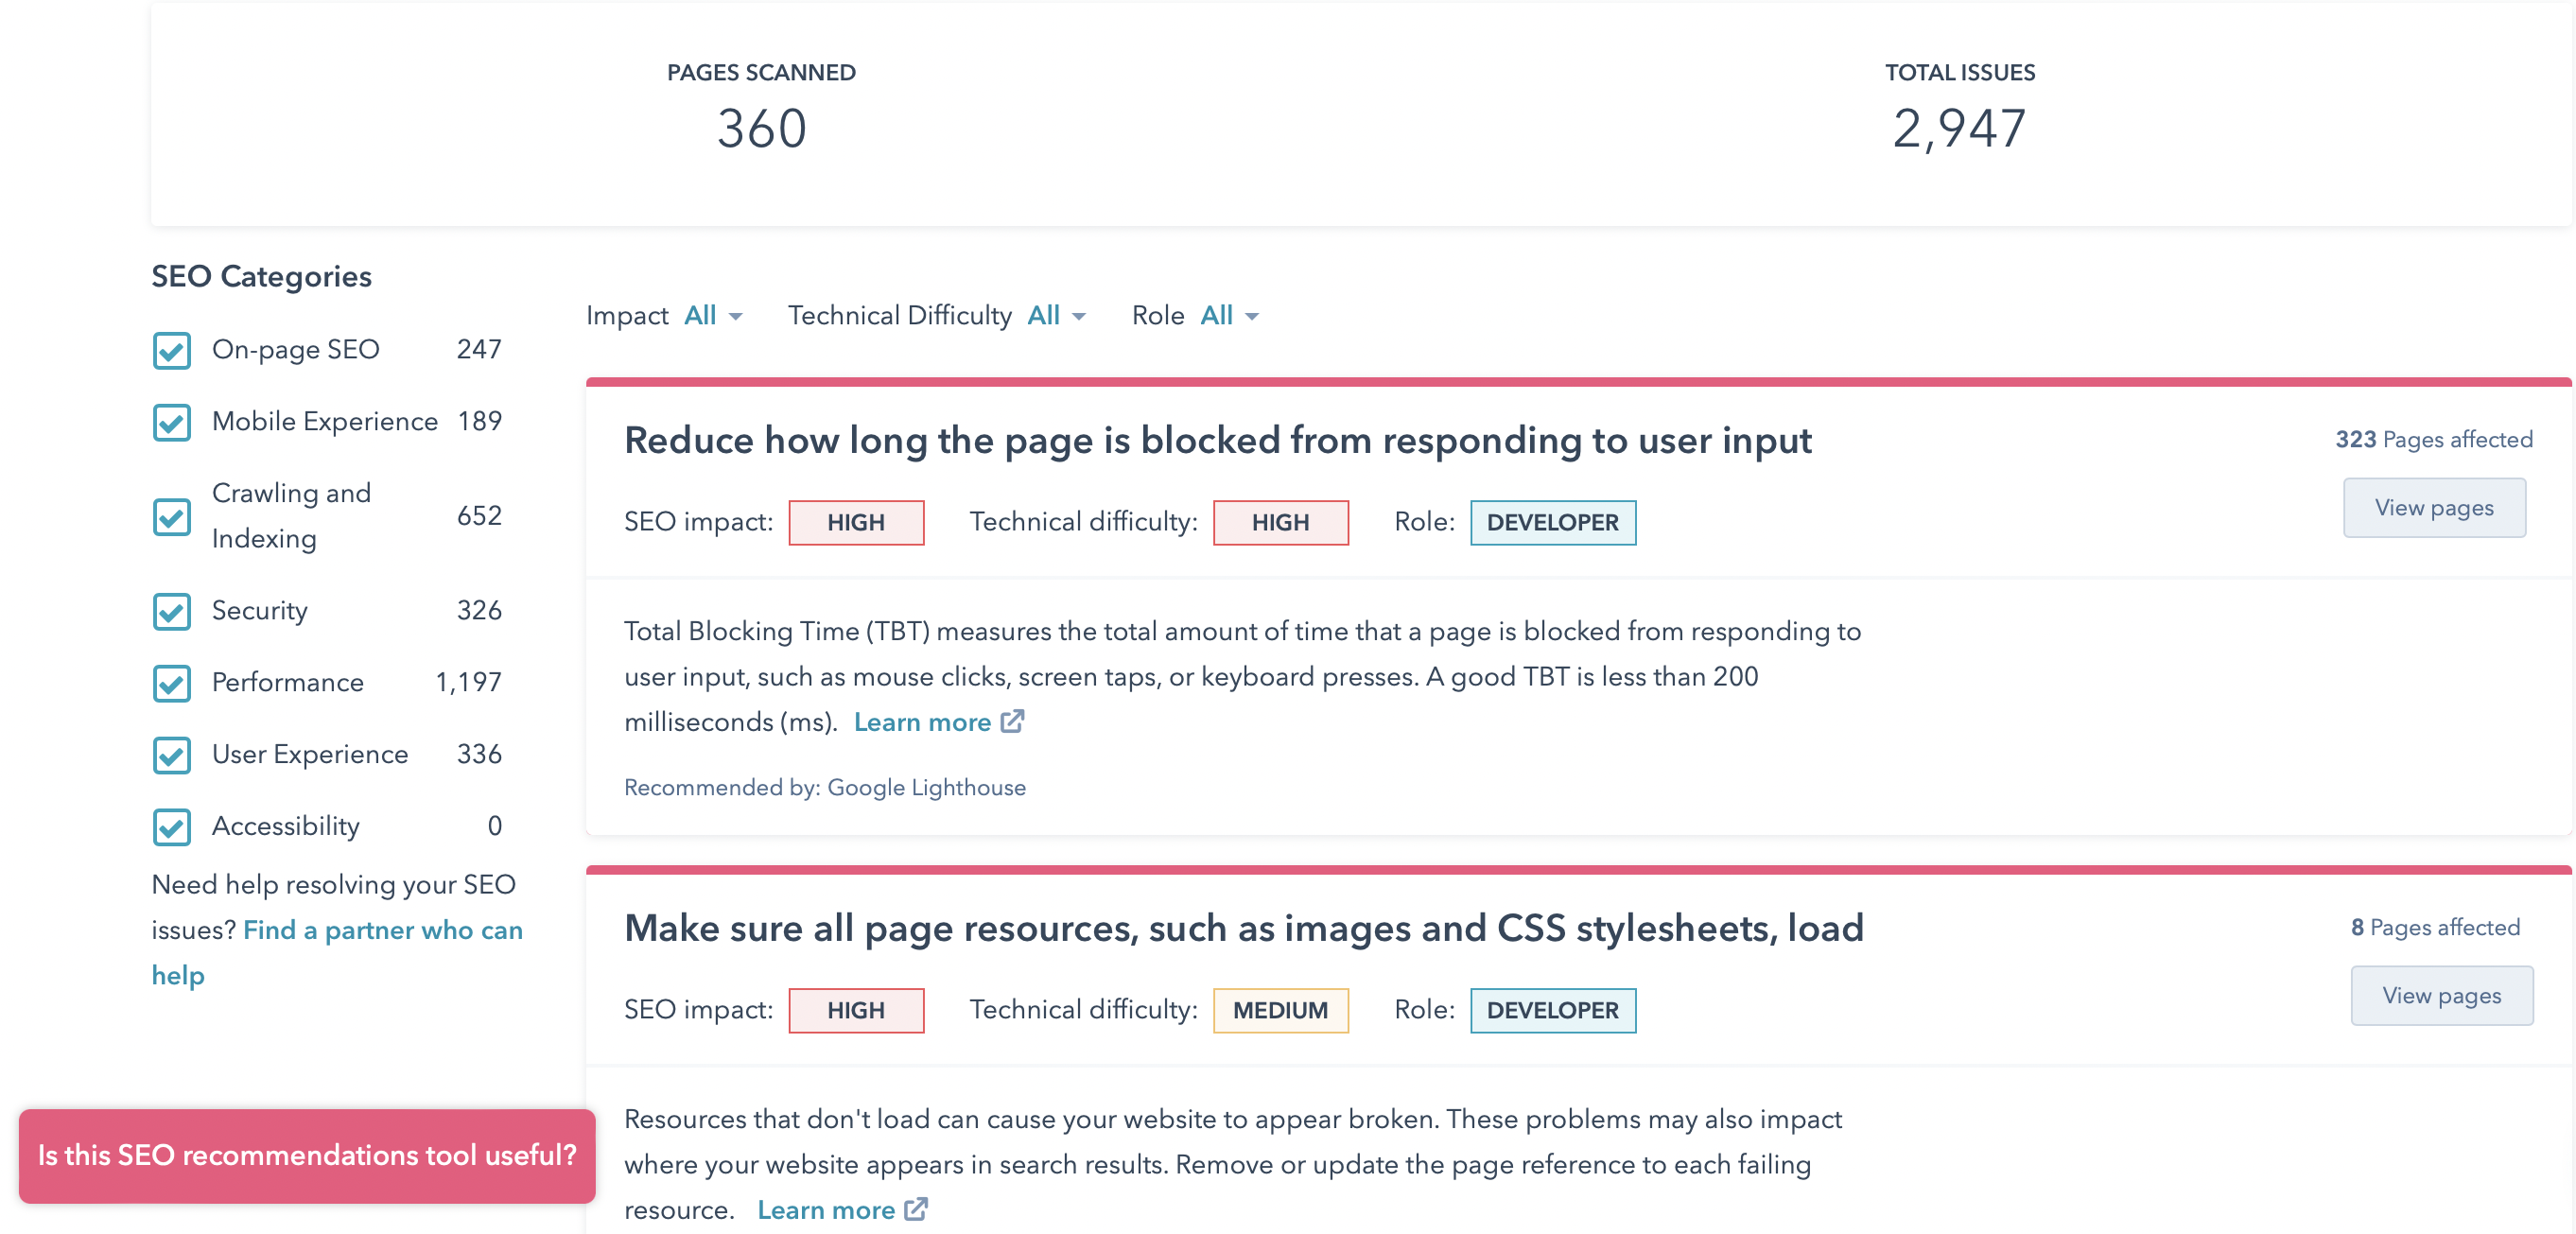 View SEO recommendations in HubSpot